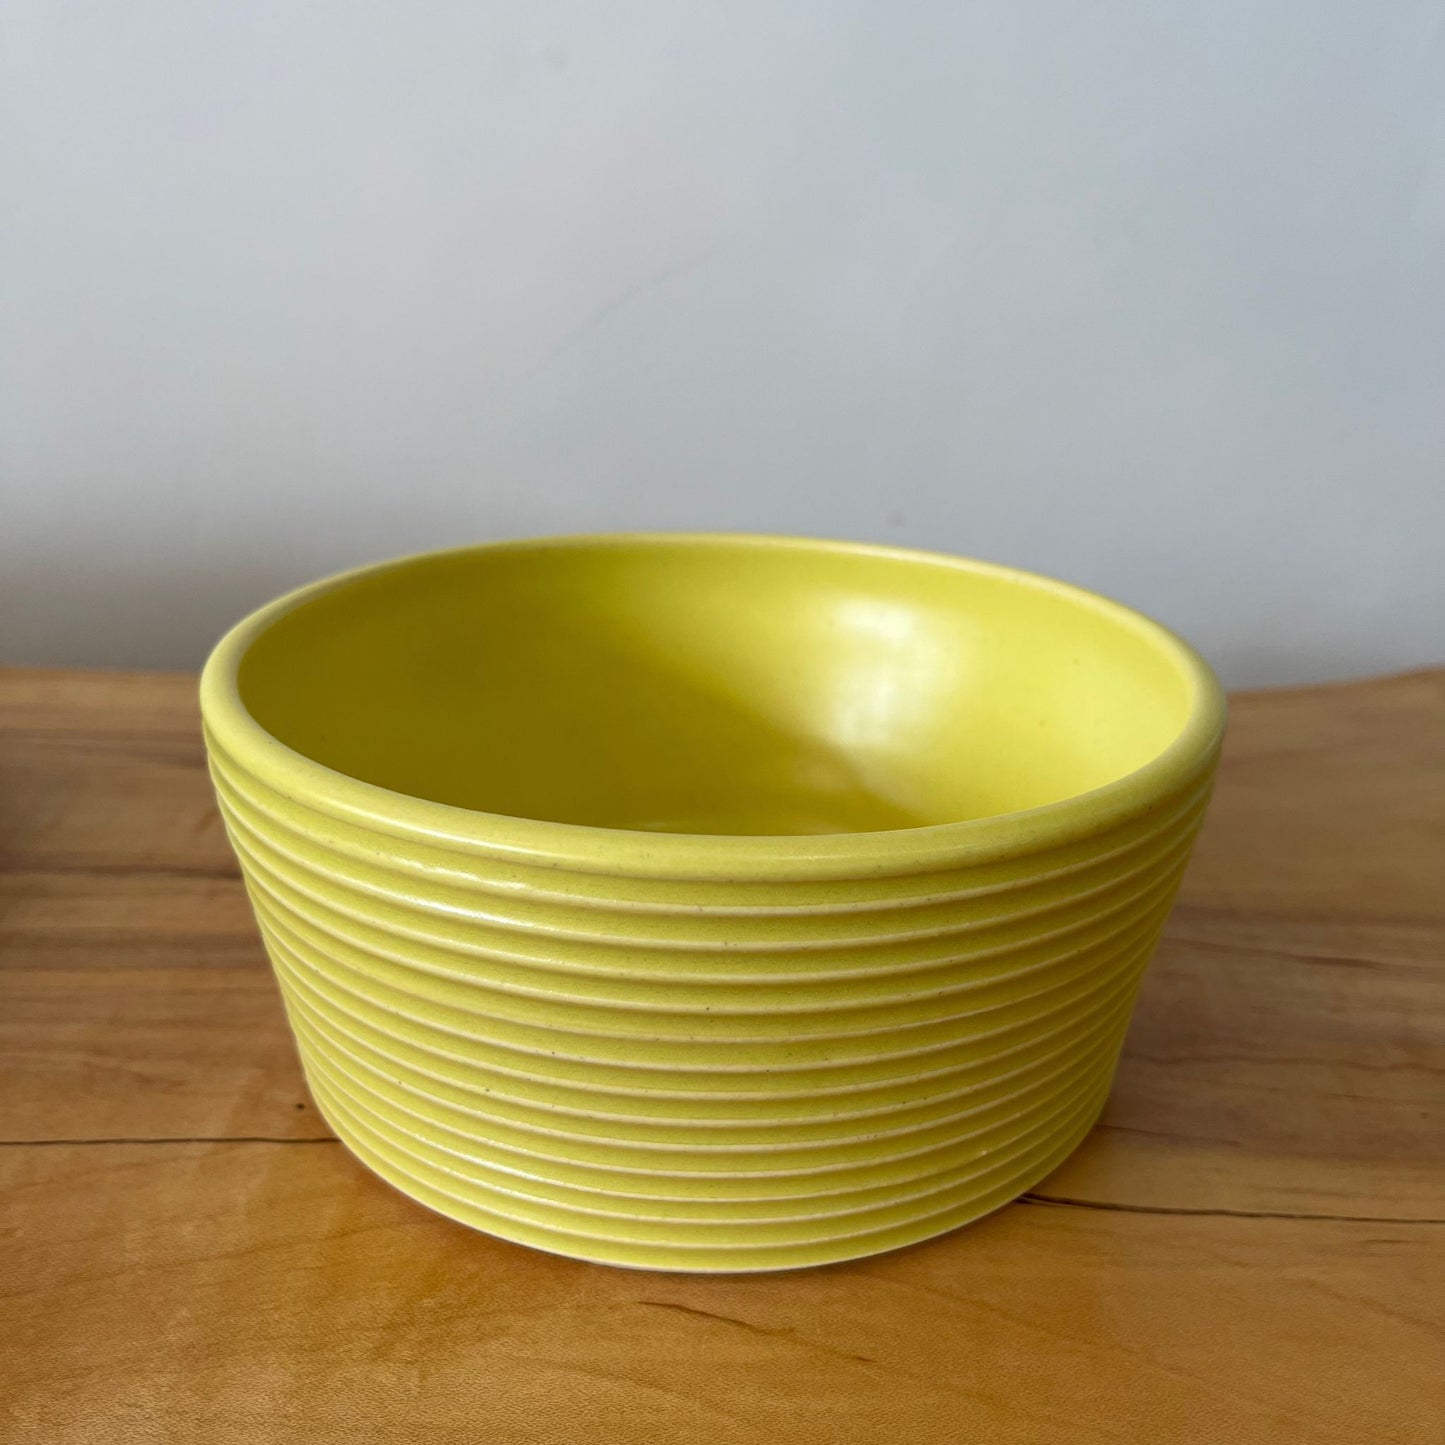 Wheel-thrown ribbed ceramic stoneware dinner bowl with handmade glaze in yellow/ zest color. 6" x 2.5"